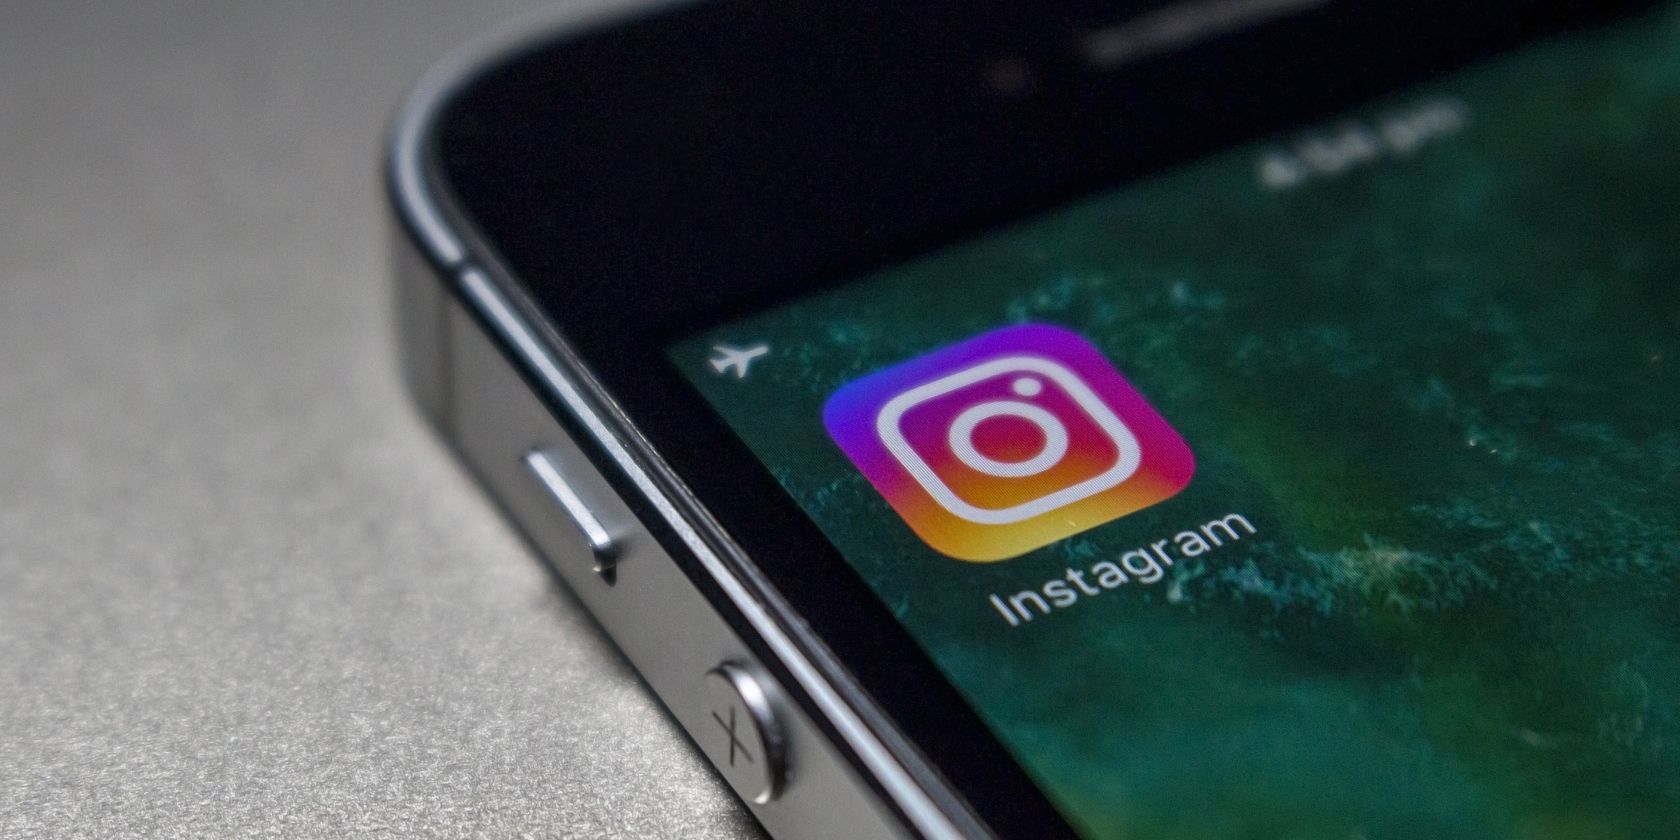 Have You Broken a Rule on Instagram? Here’s How to Check